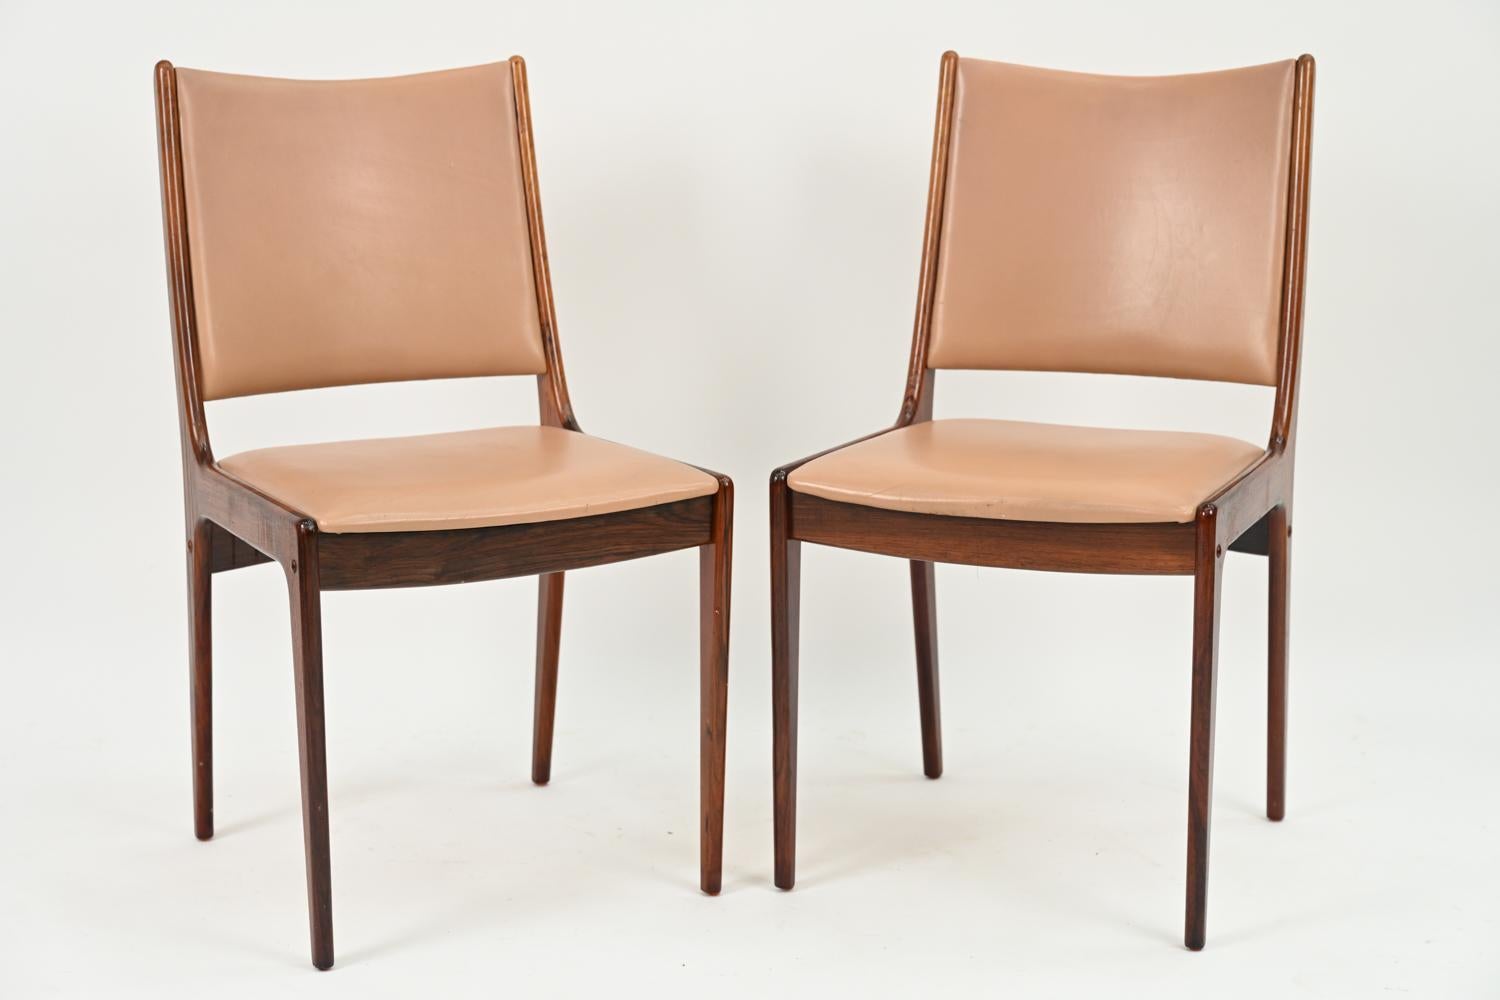 '8' Johannes Andersen for Uldum Rosewood Dining Chairs 2